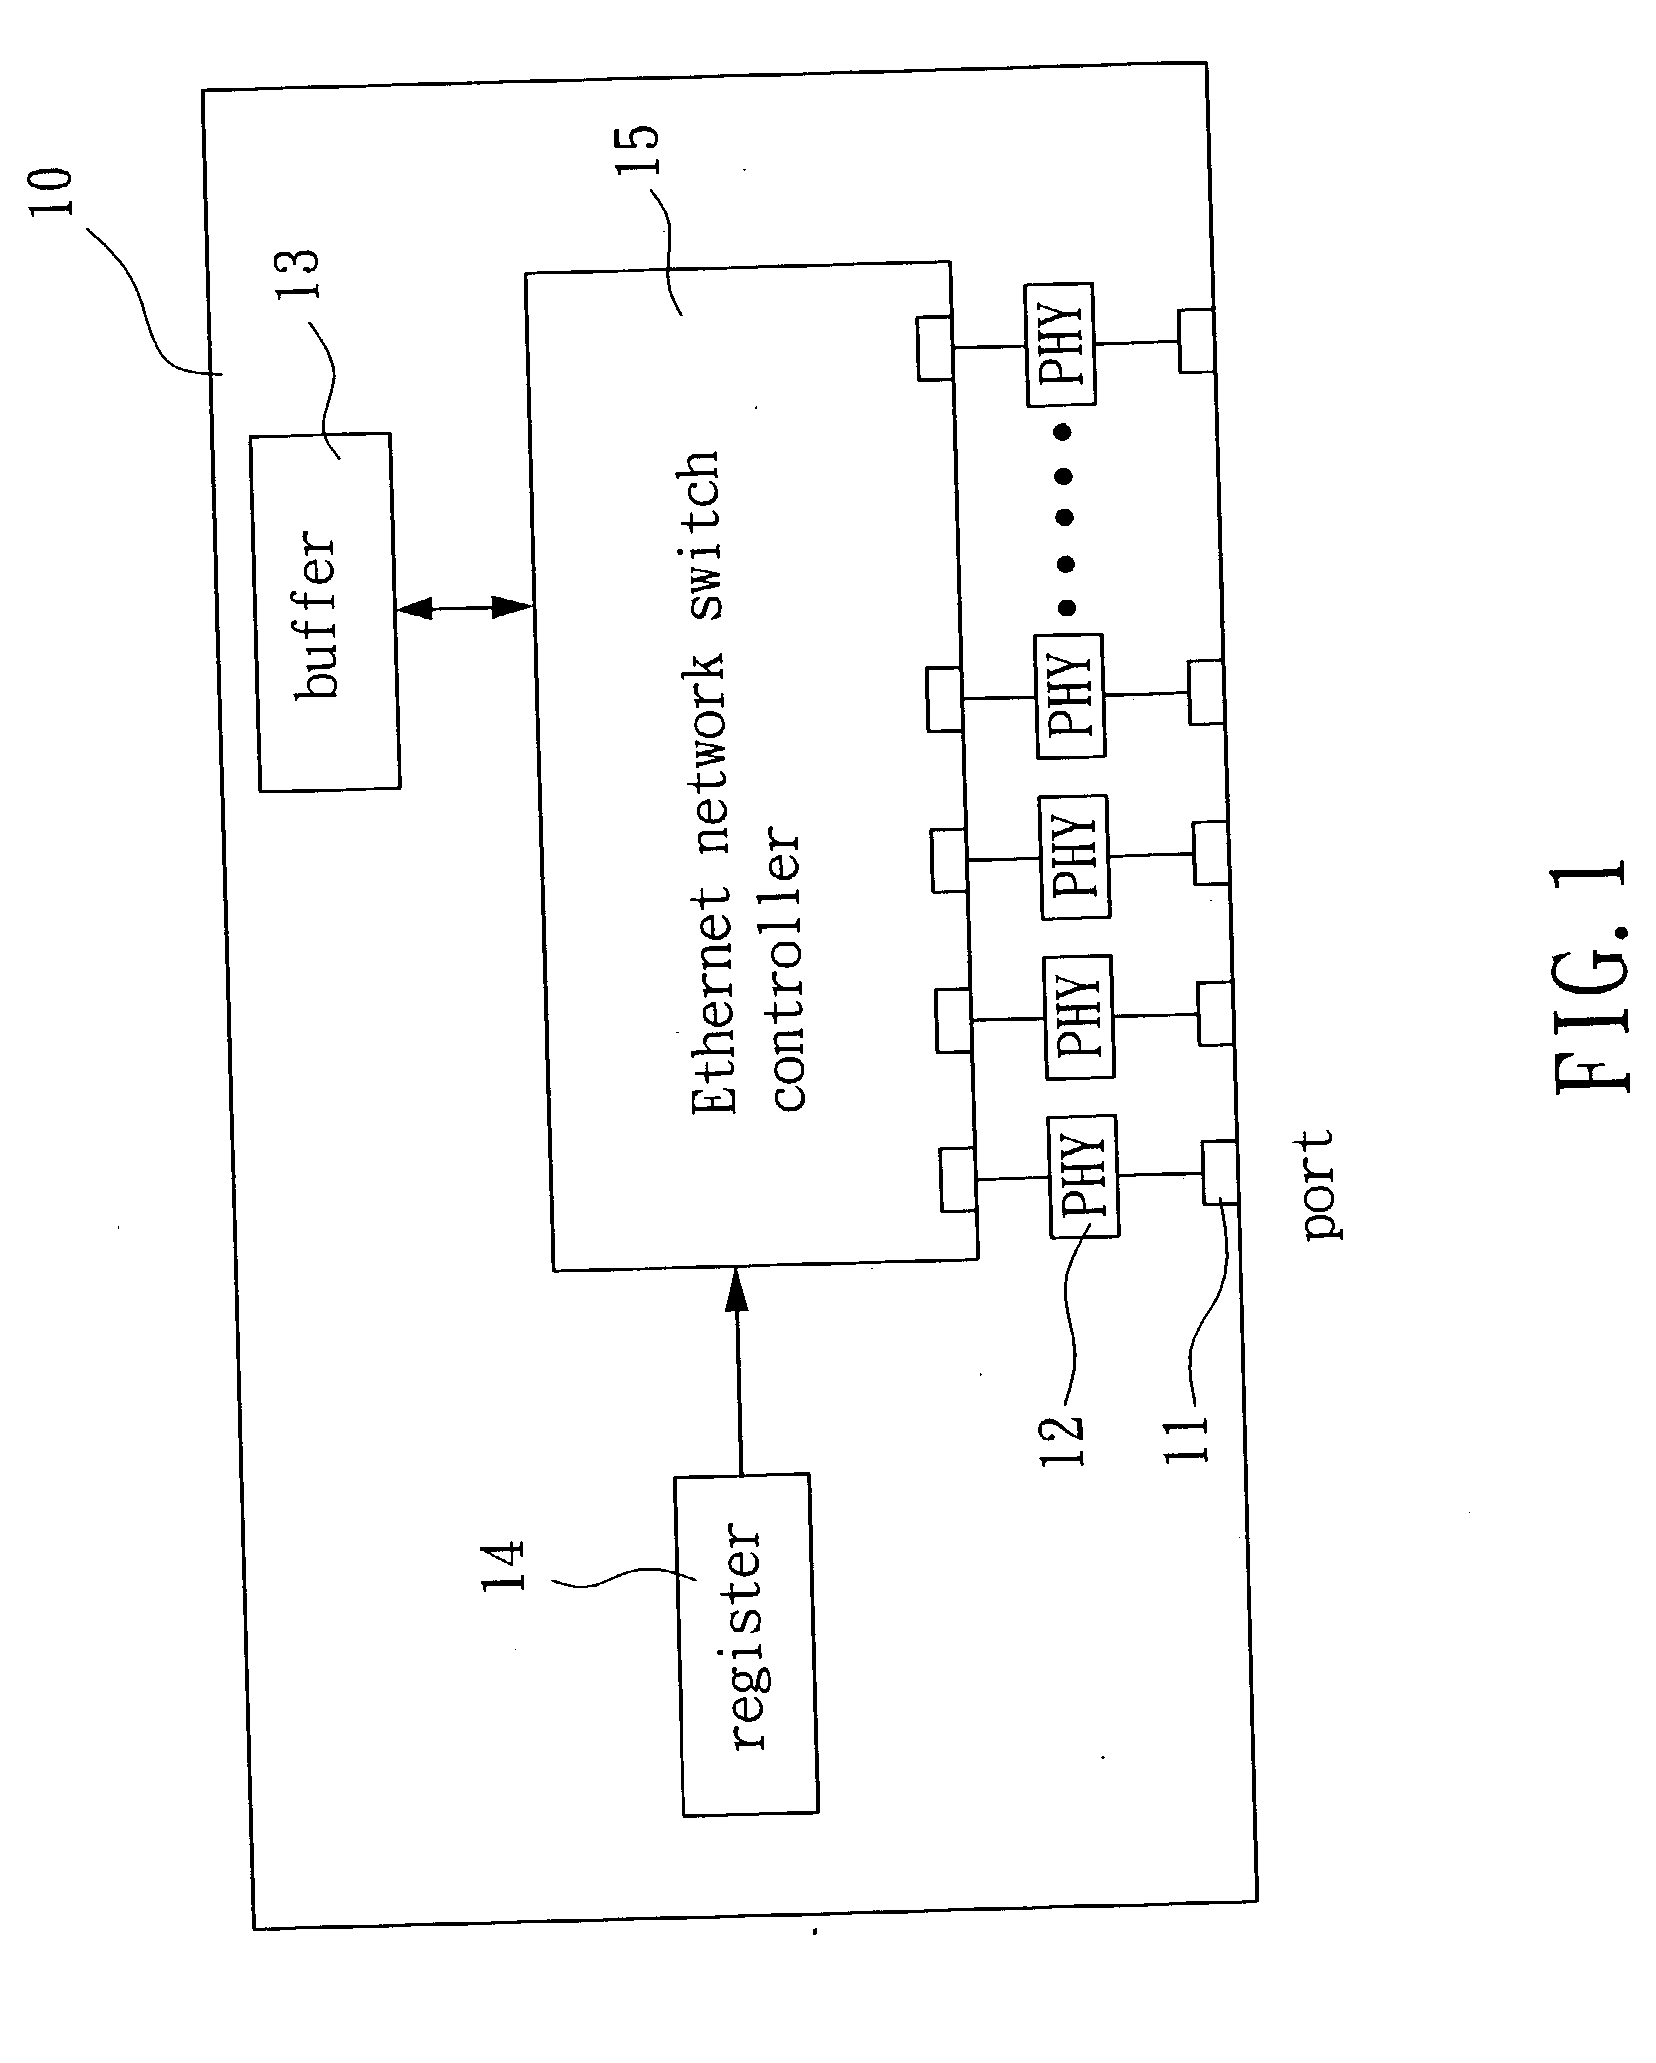 Method for congestion control and associated switch controller